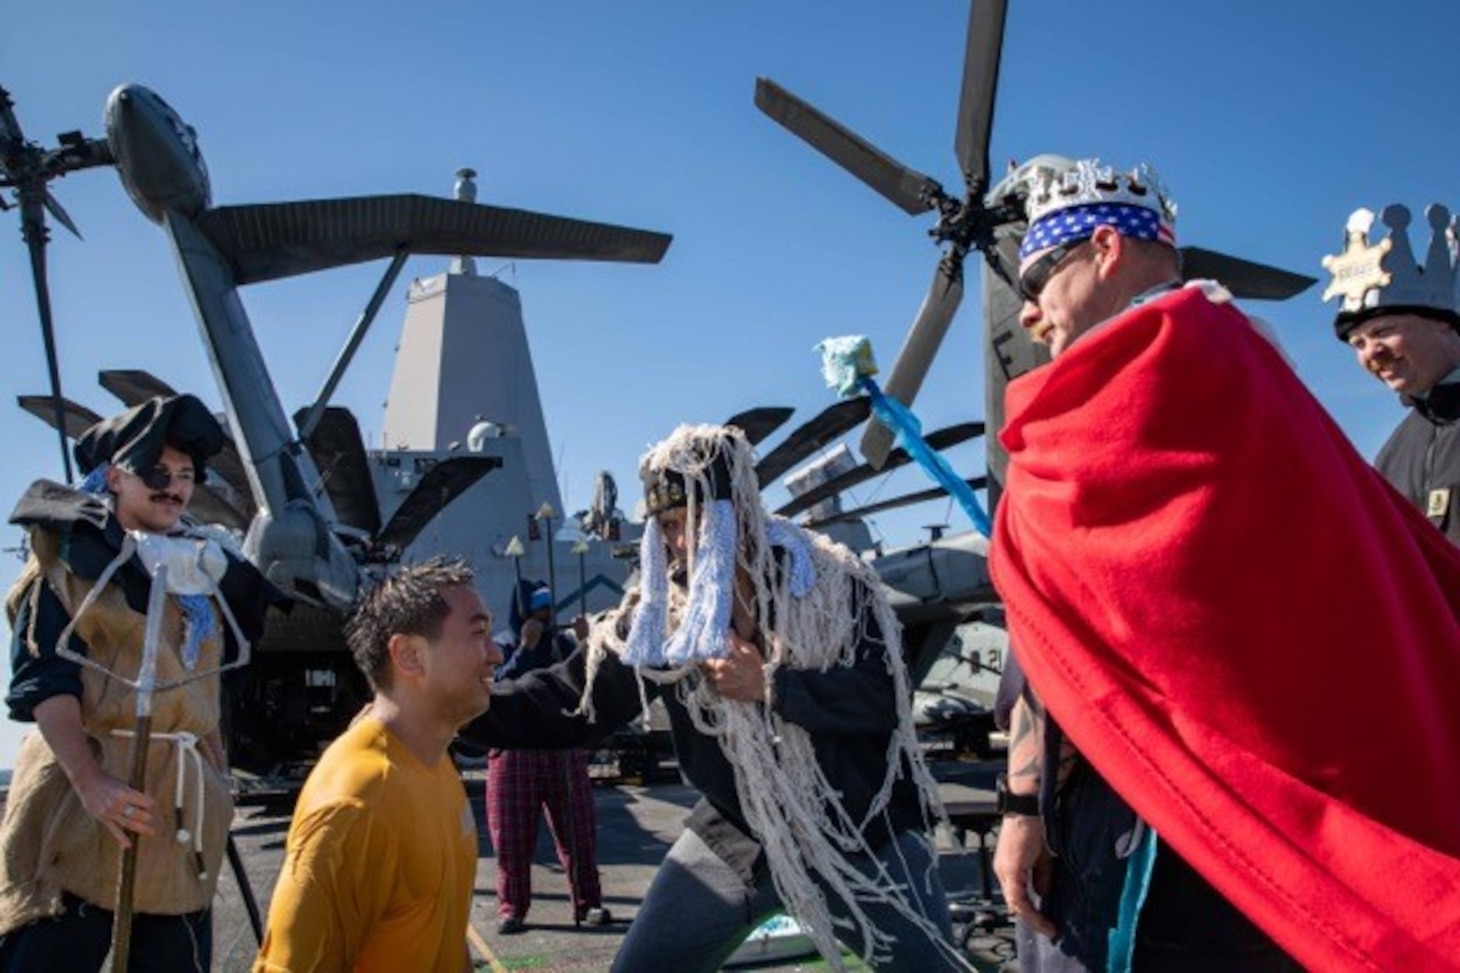 Sailors, assigned to the San Antonio-class amphibious transport dock ship USS Arlington (LPD 24), are welcomed into the “Order of the Blue Nose” during an Arctic Circle ceremony on Arlington’s flight deck, April 22, 2022.